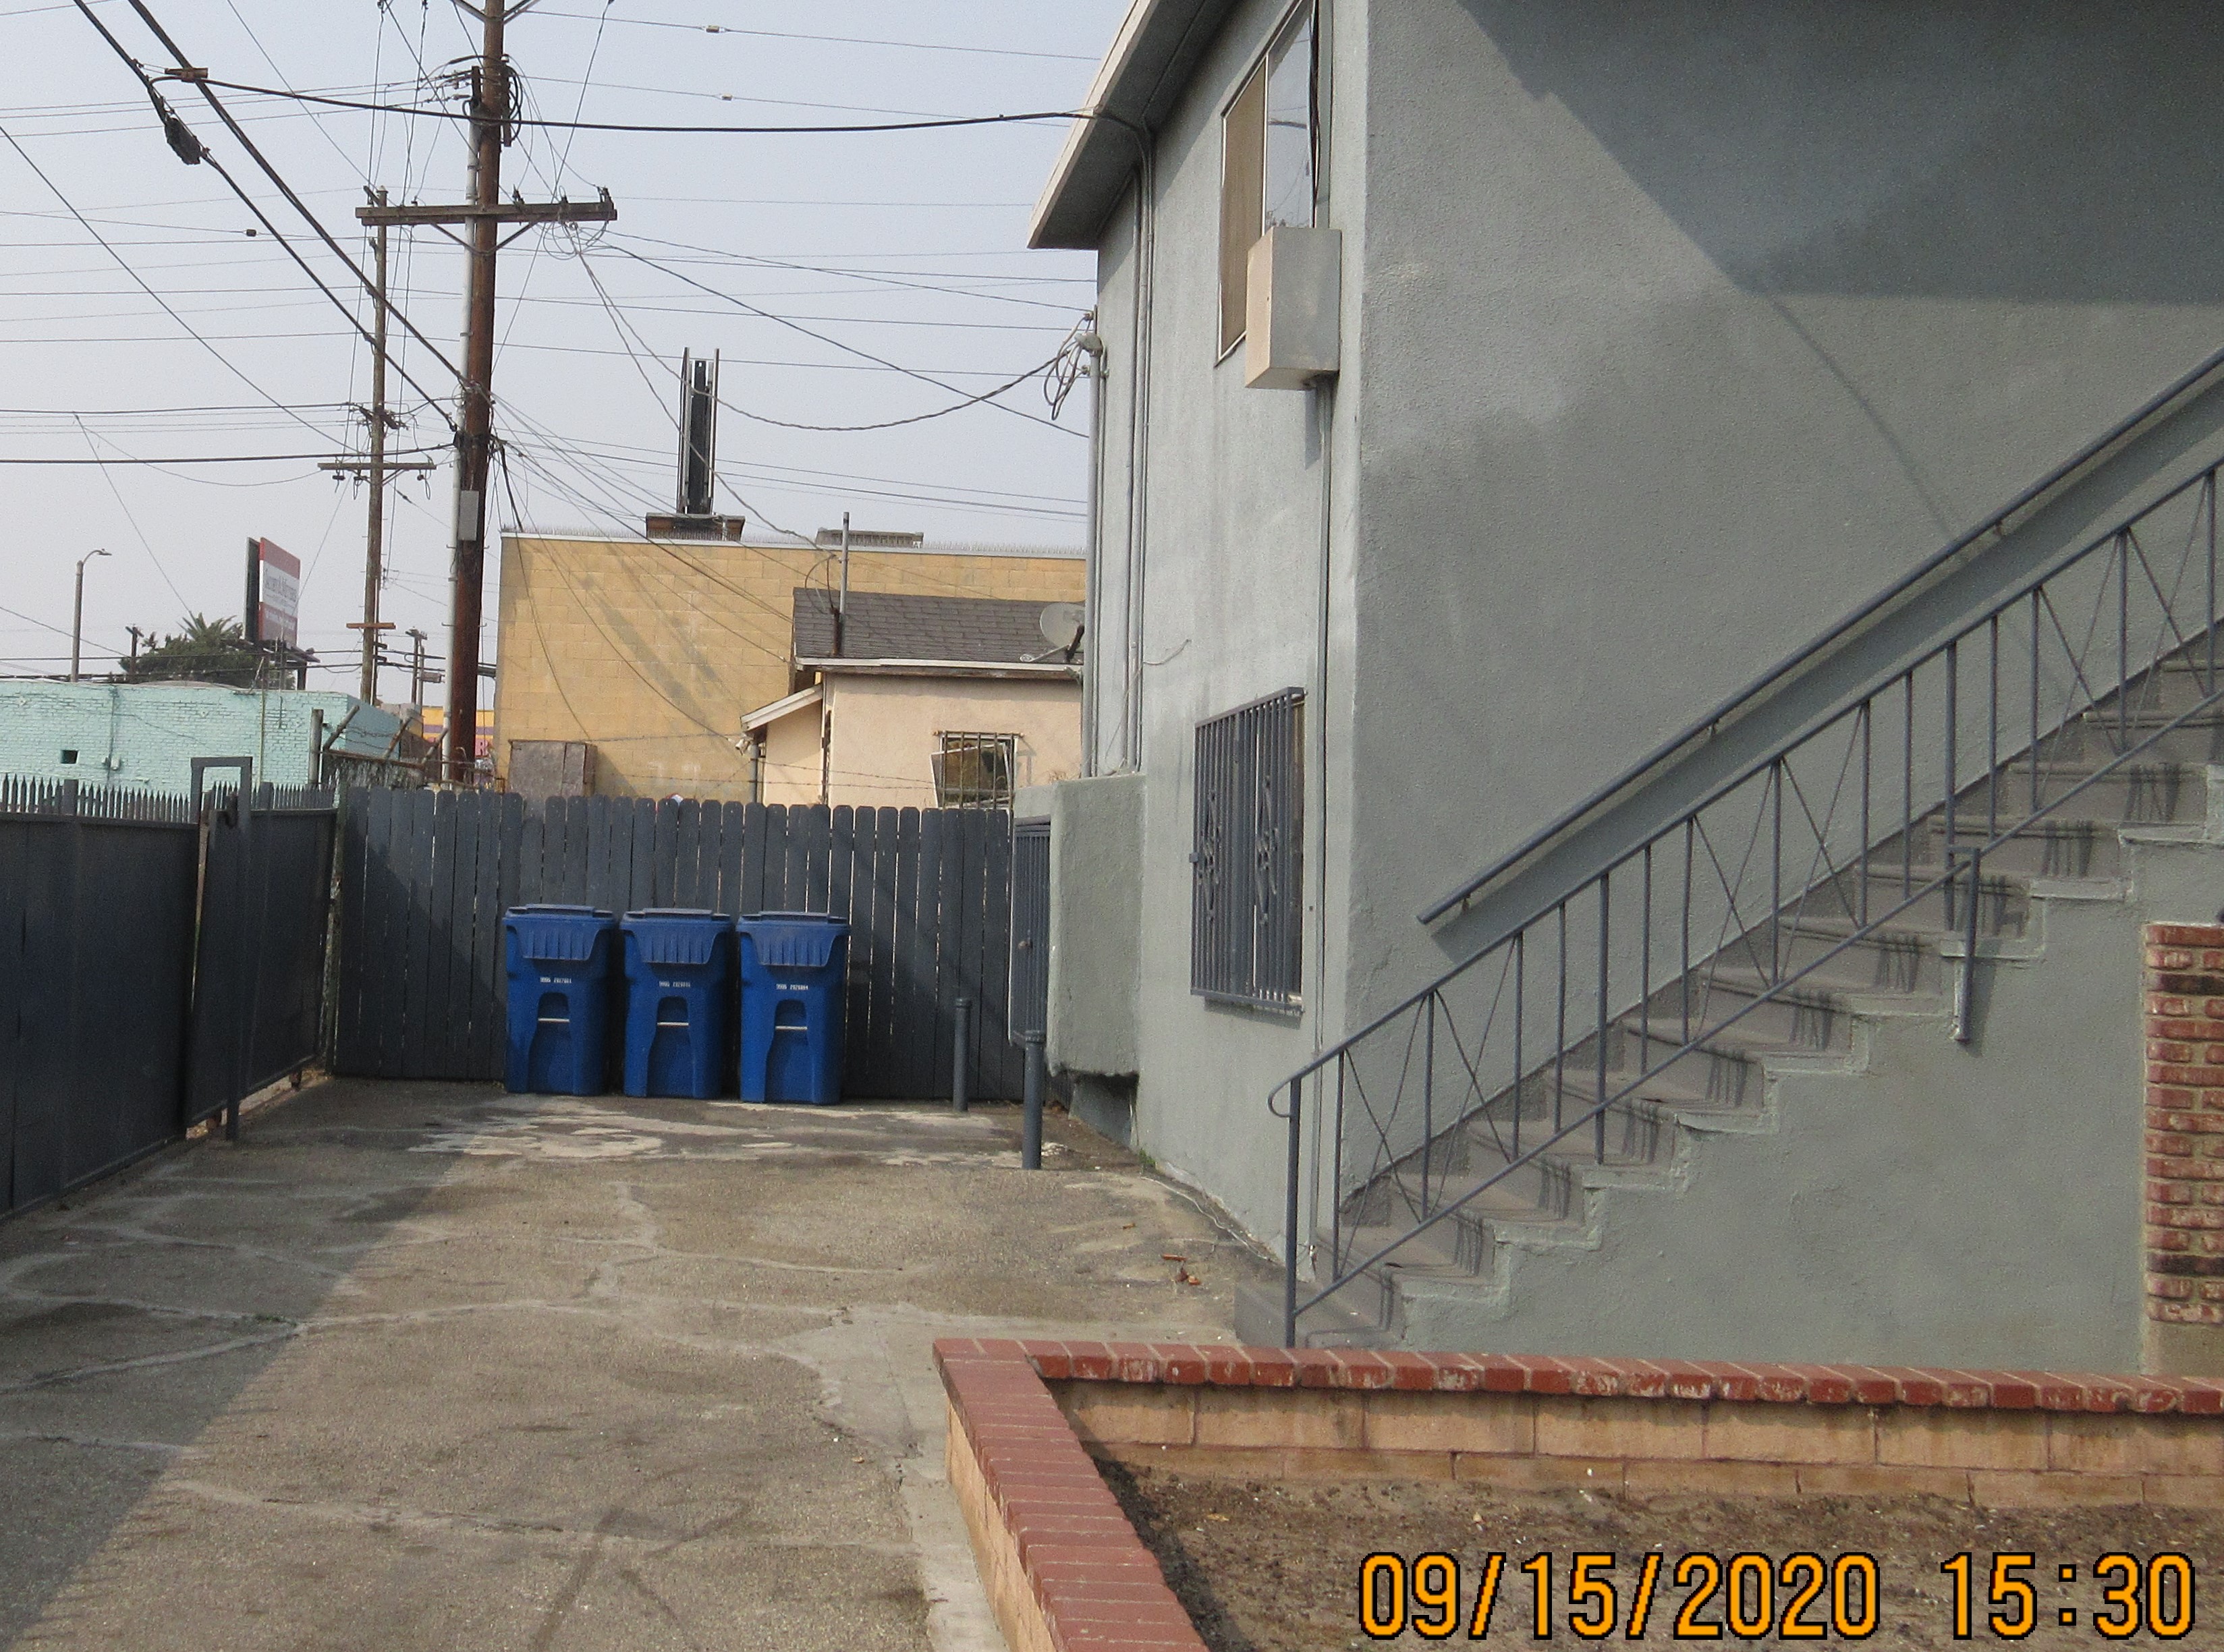 There is a 2 story blue building on the right with a set of stairs leading to the second floor. View of patio, three recycle bins.